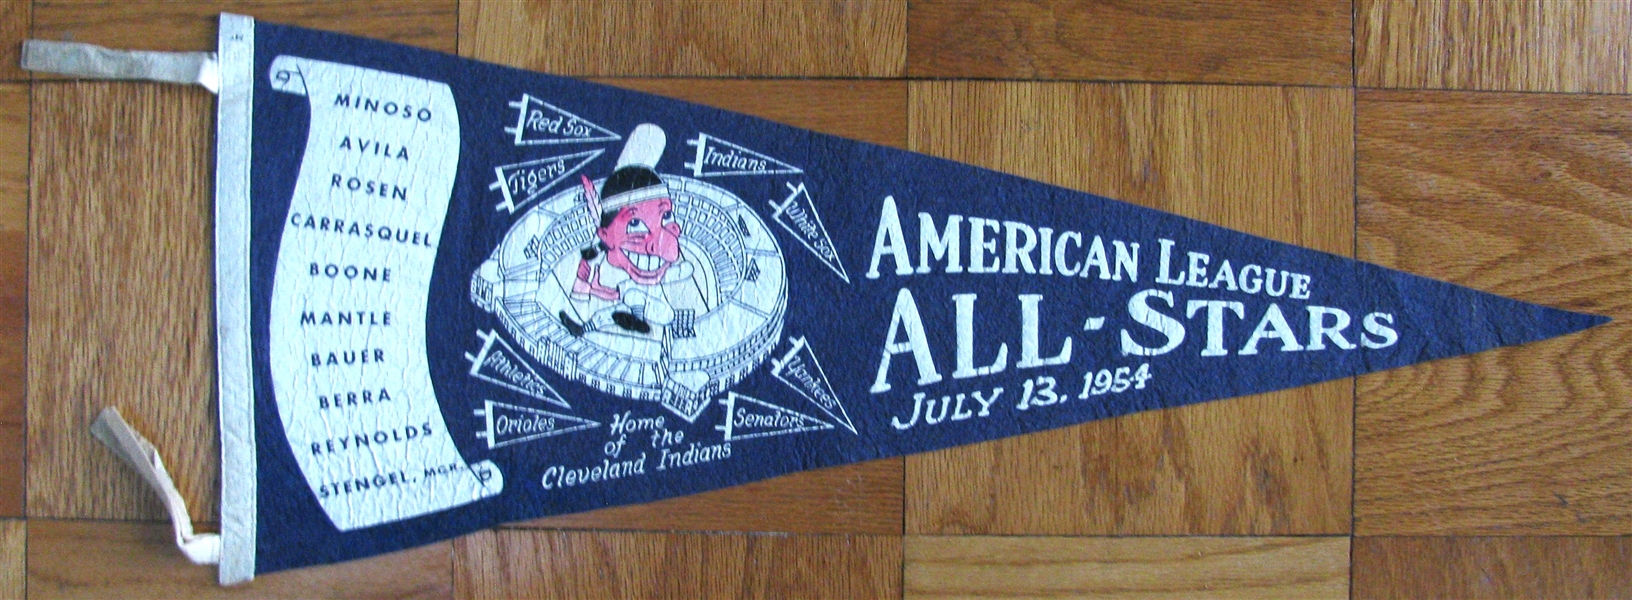 1954 ALL-STAR GAME AMERICAN LEAGUE PENNANT w/MANTLE